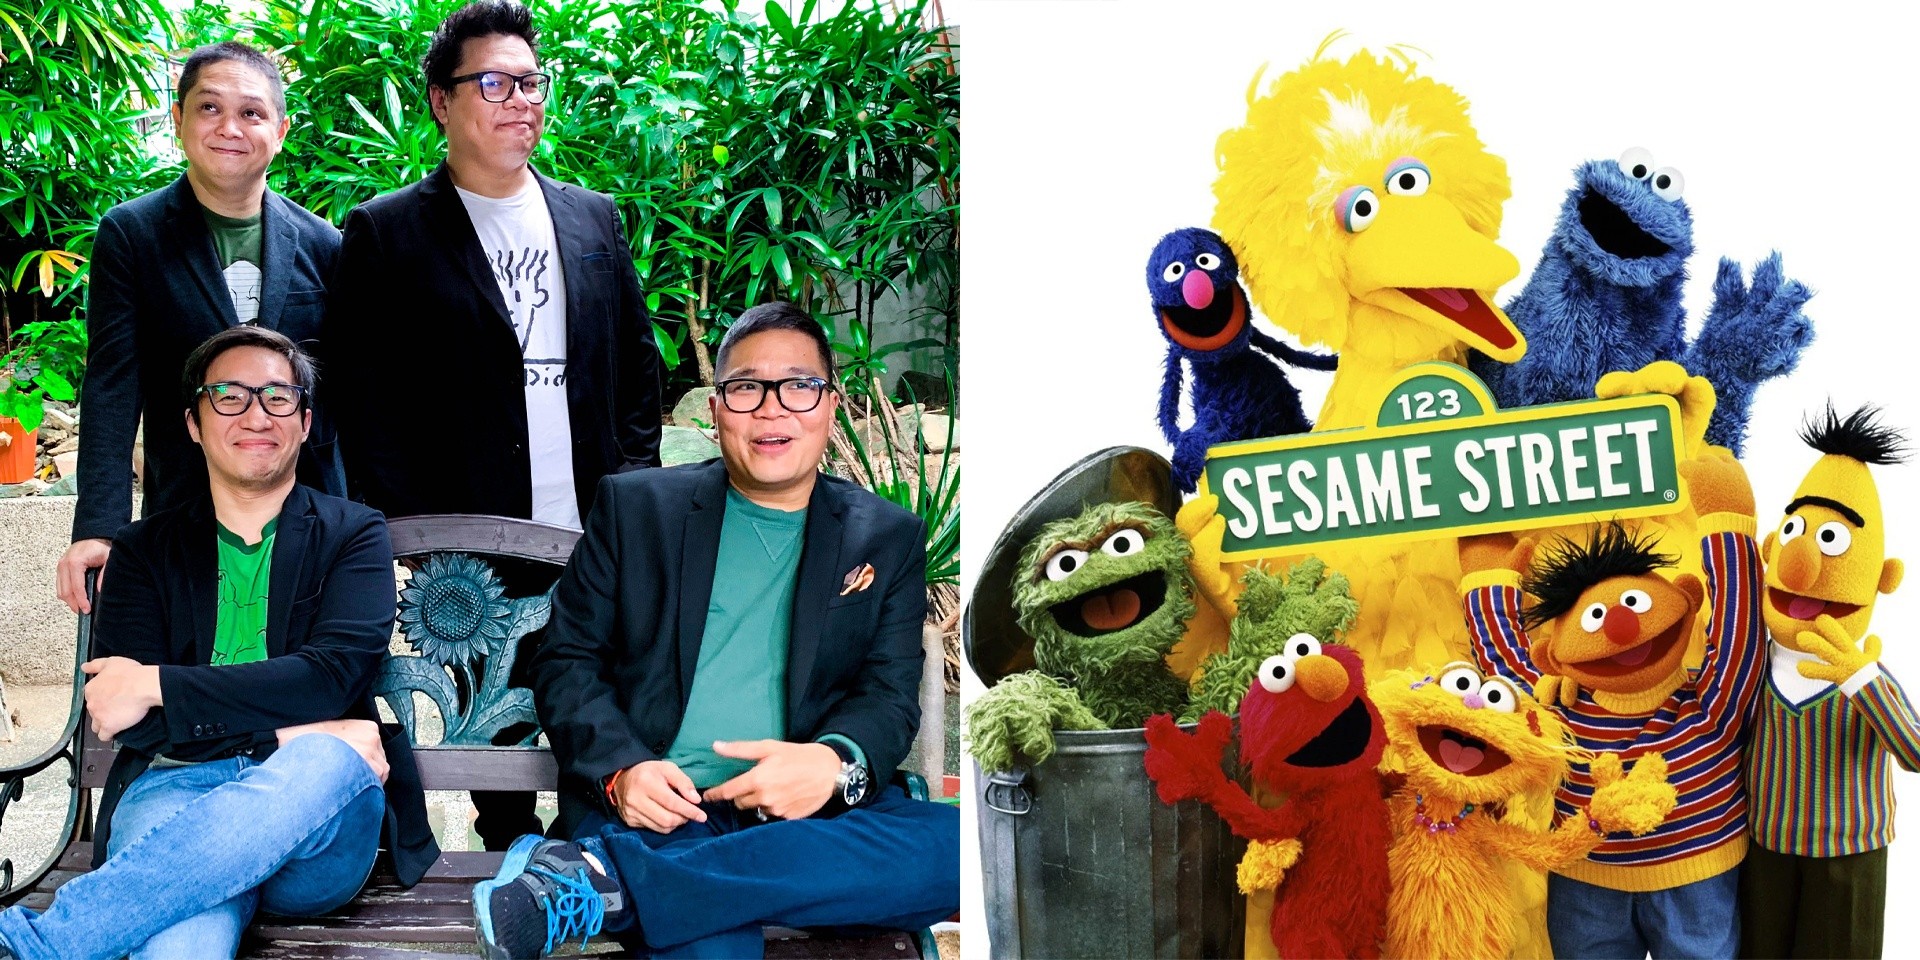 The Itchyworms take you to 'Sesame Street' with Sala Set cover – watch